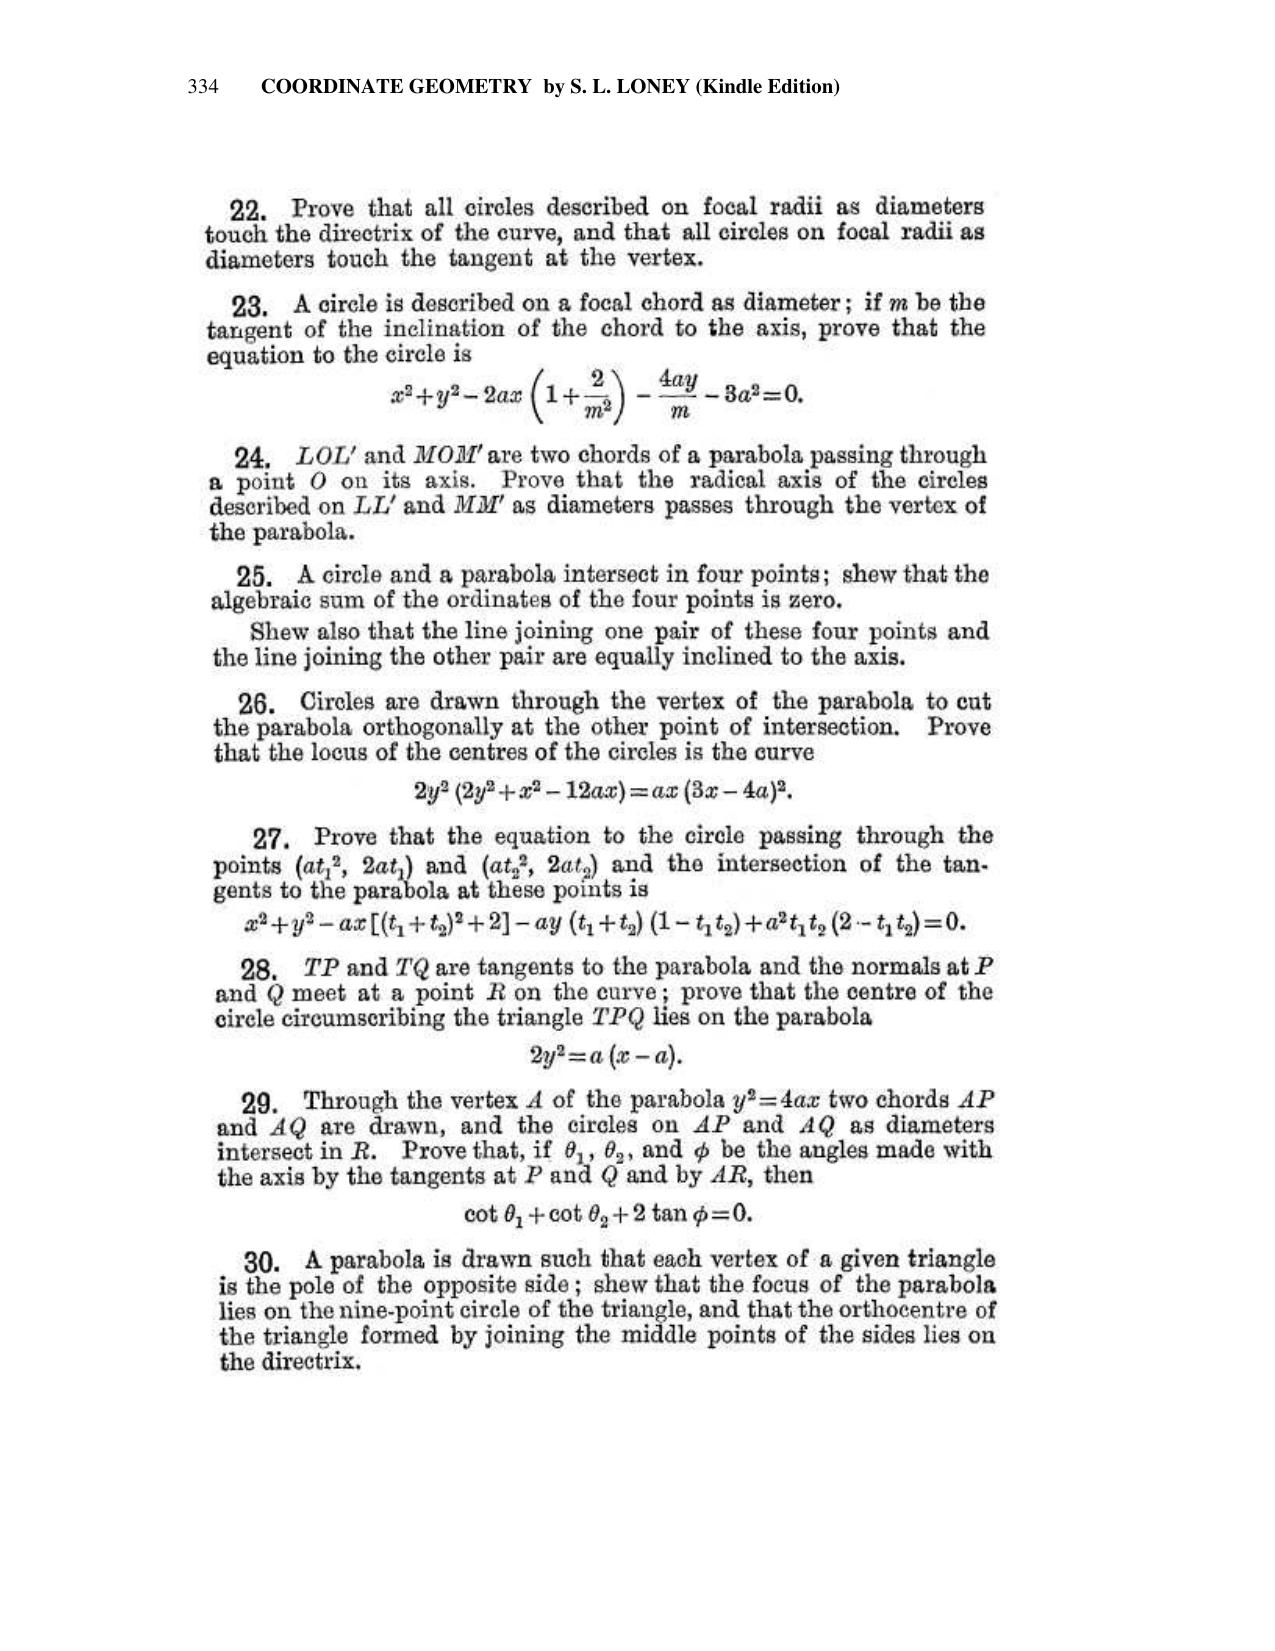 Chapter 10: The Parabola - SL Loney Solutions: The Elements of Coordinate Geometry - Page 48